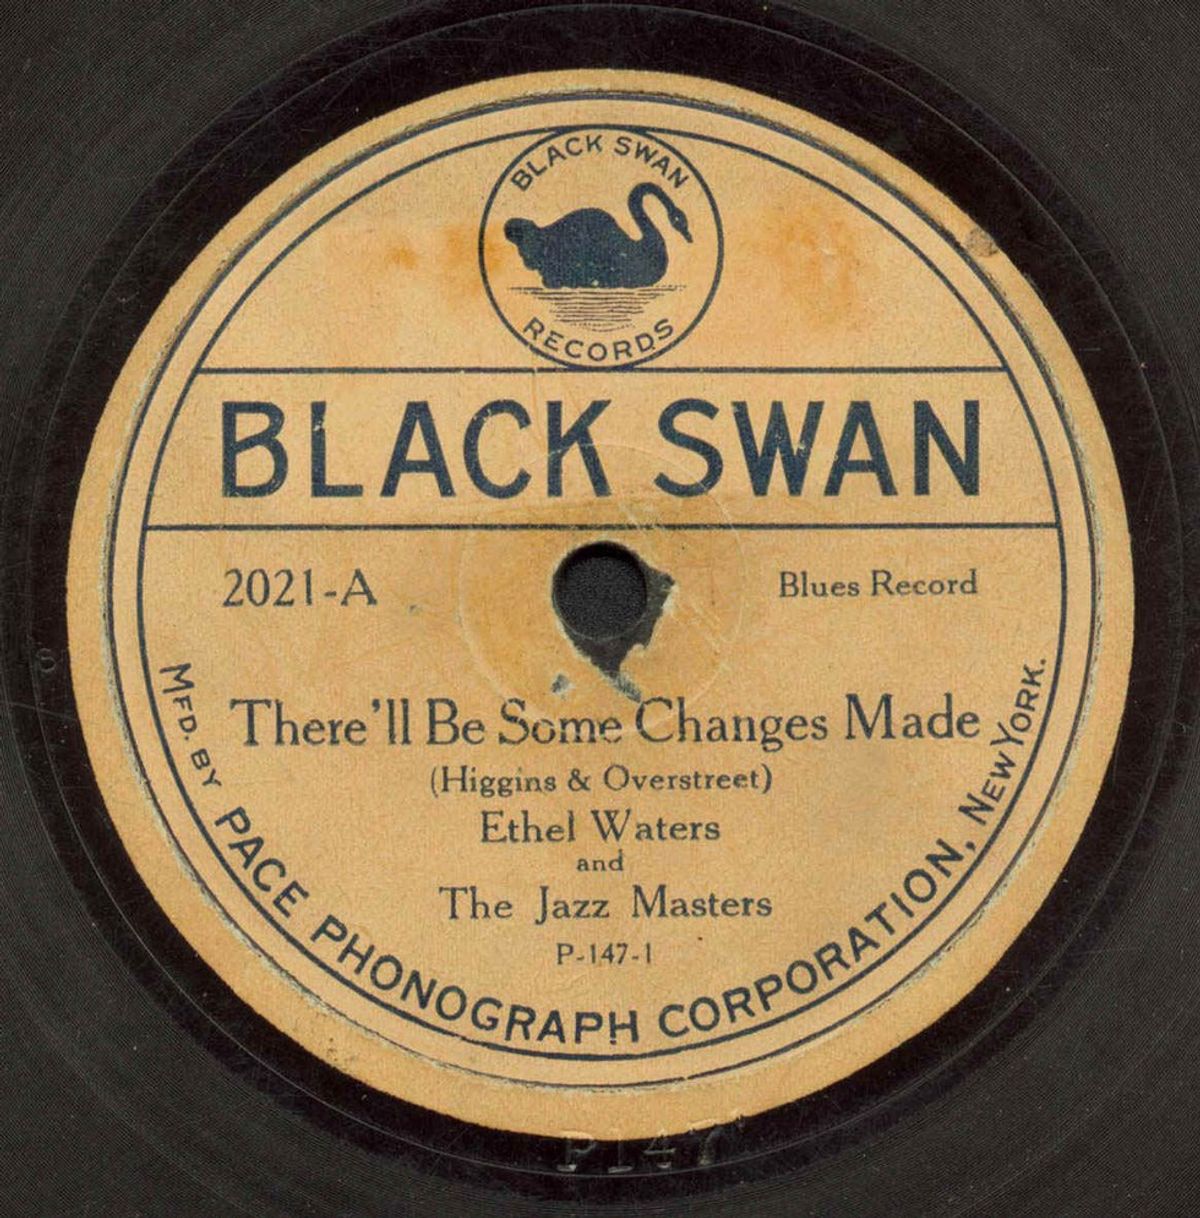 Harry Pace, Black Swan Records, and their relationship to W.E.B. DuBois